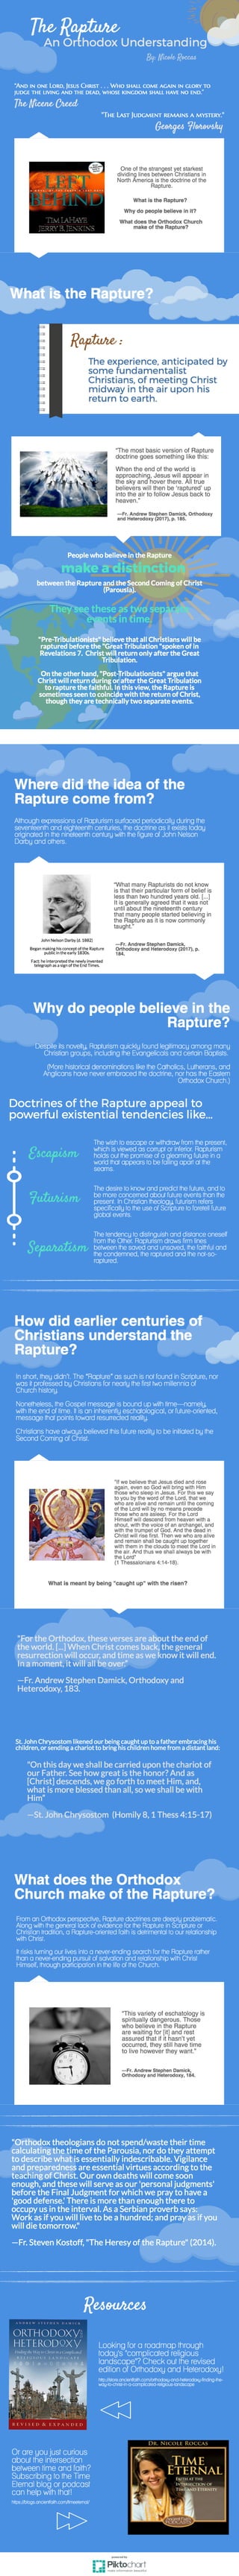 The rapture: an orthodox perspective infographic